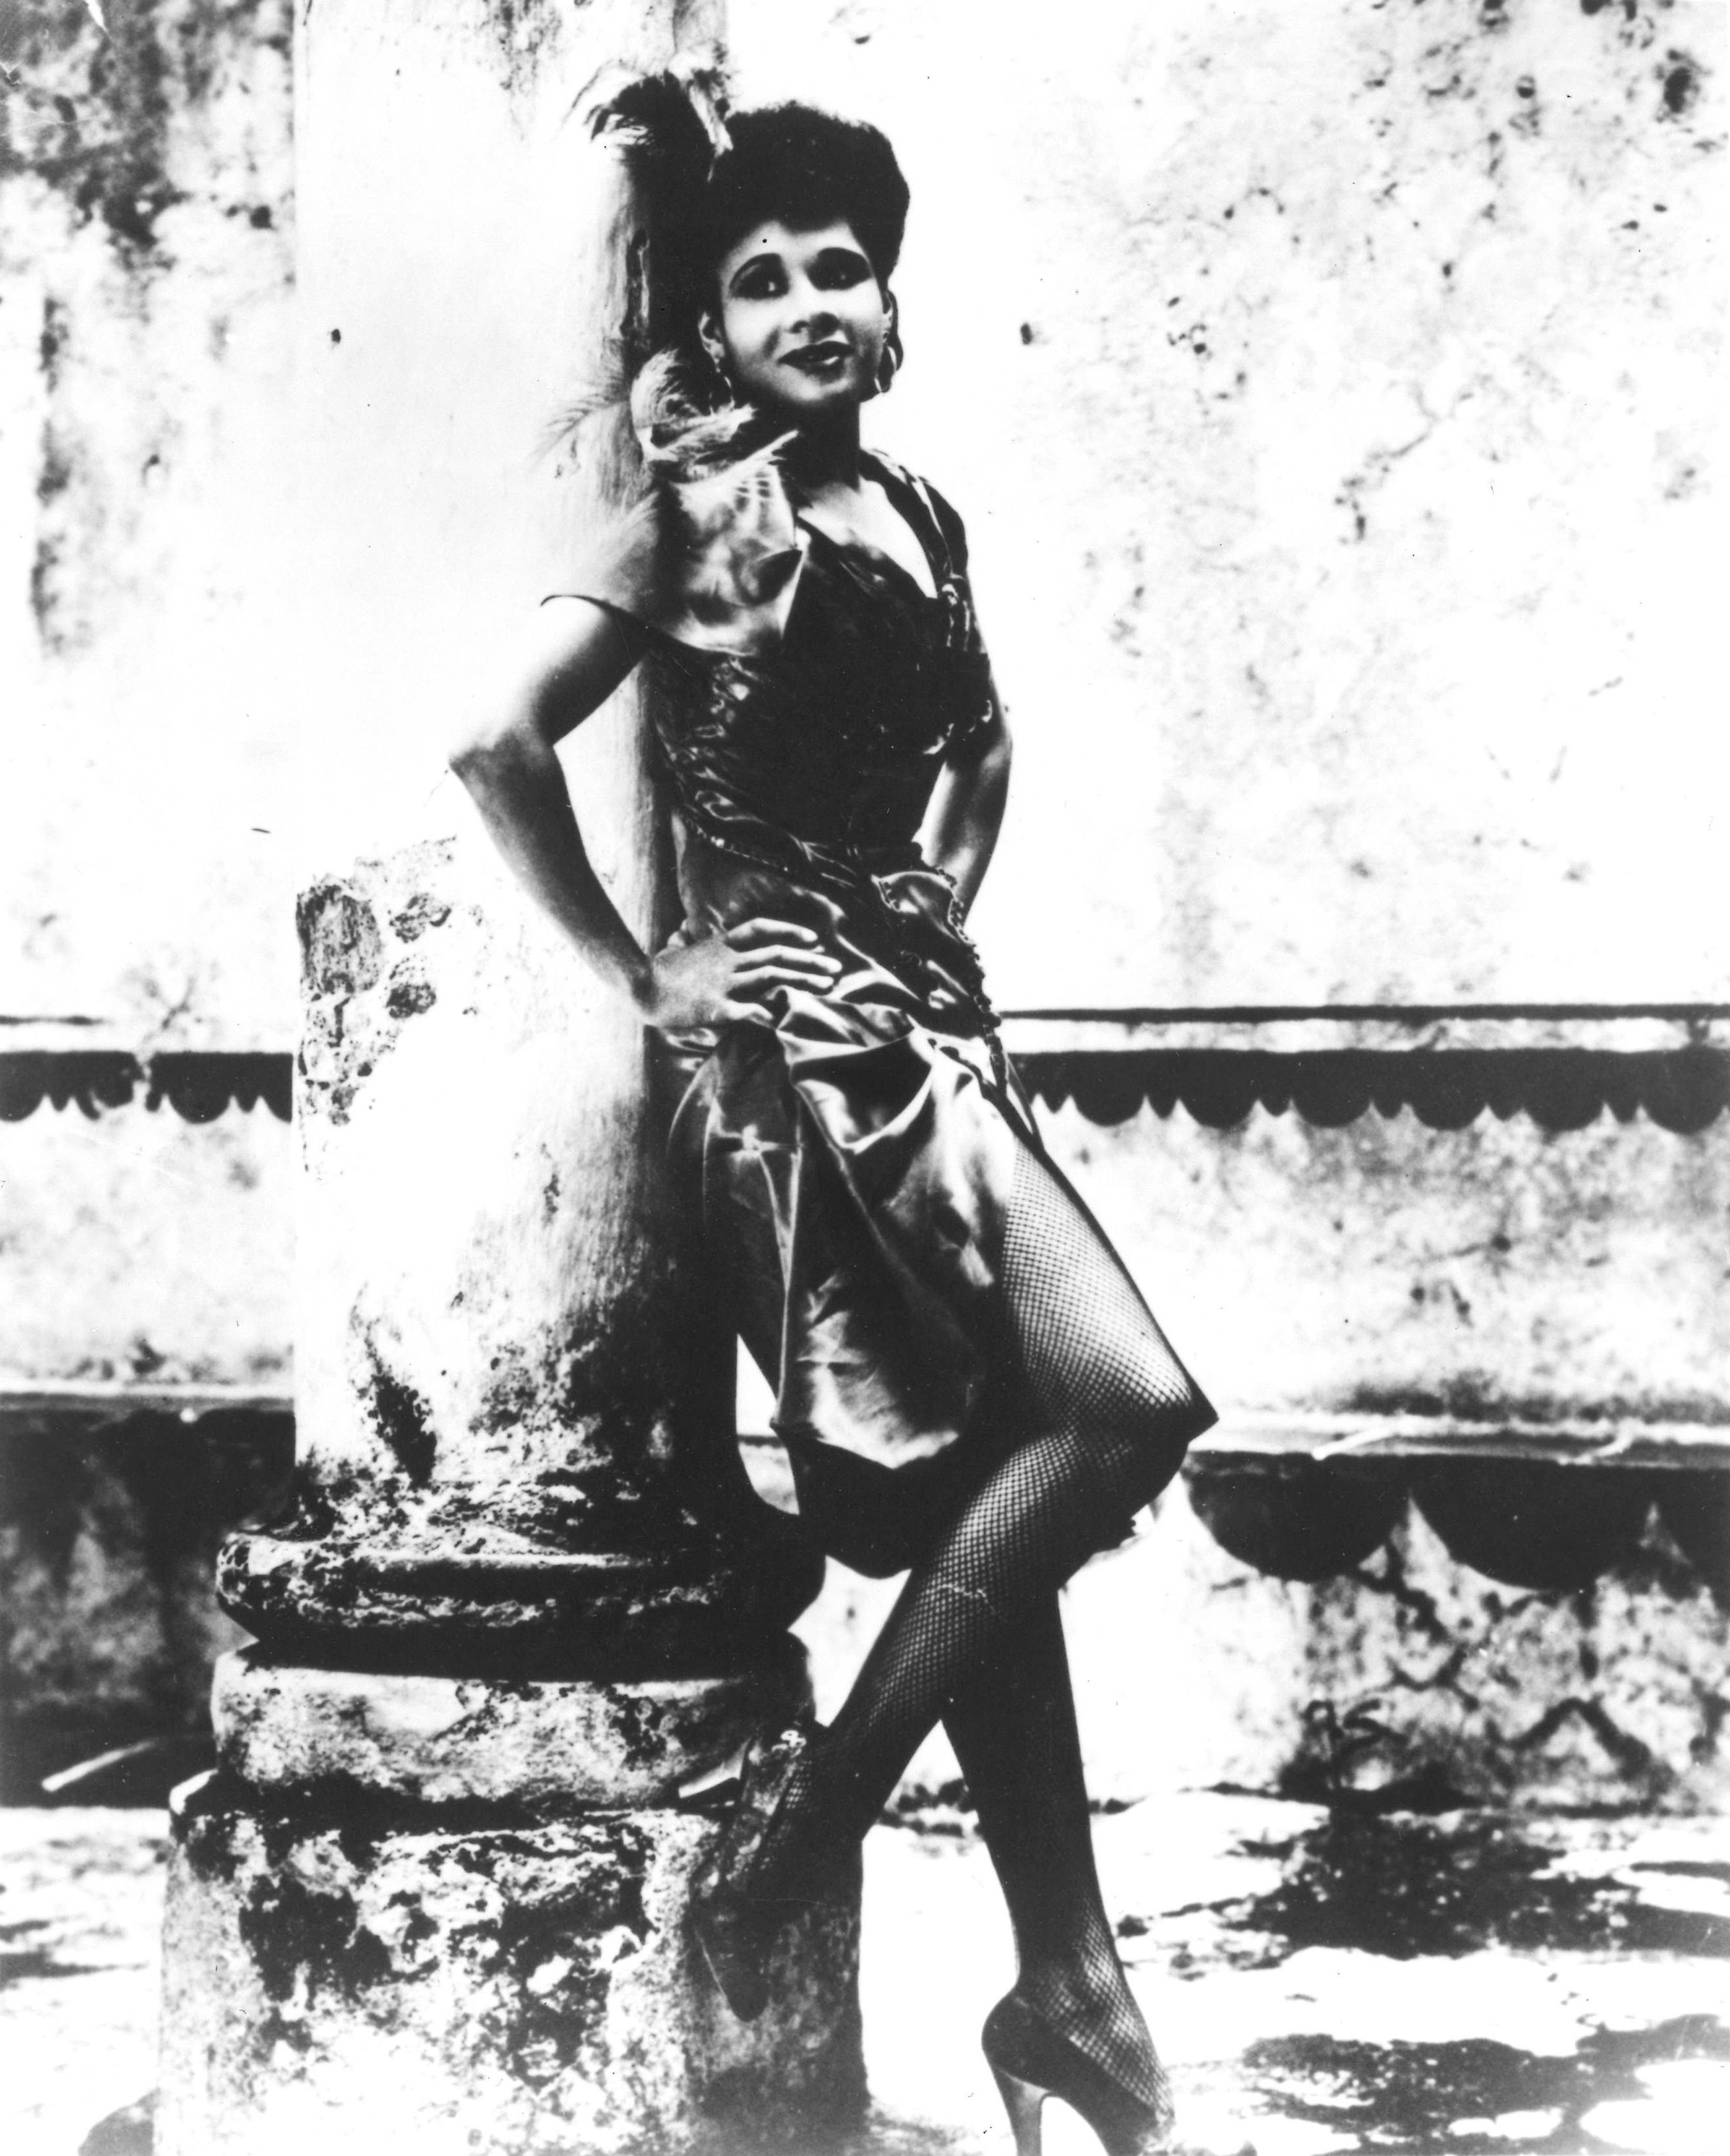 A young Dunham smiles softly into the distance, posed against a pillar in a costume consisting of heels, fishnet tights, and a shiny, ruched dress.